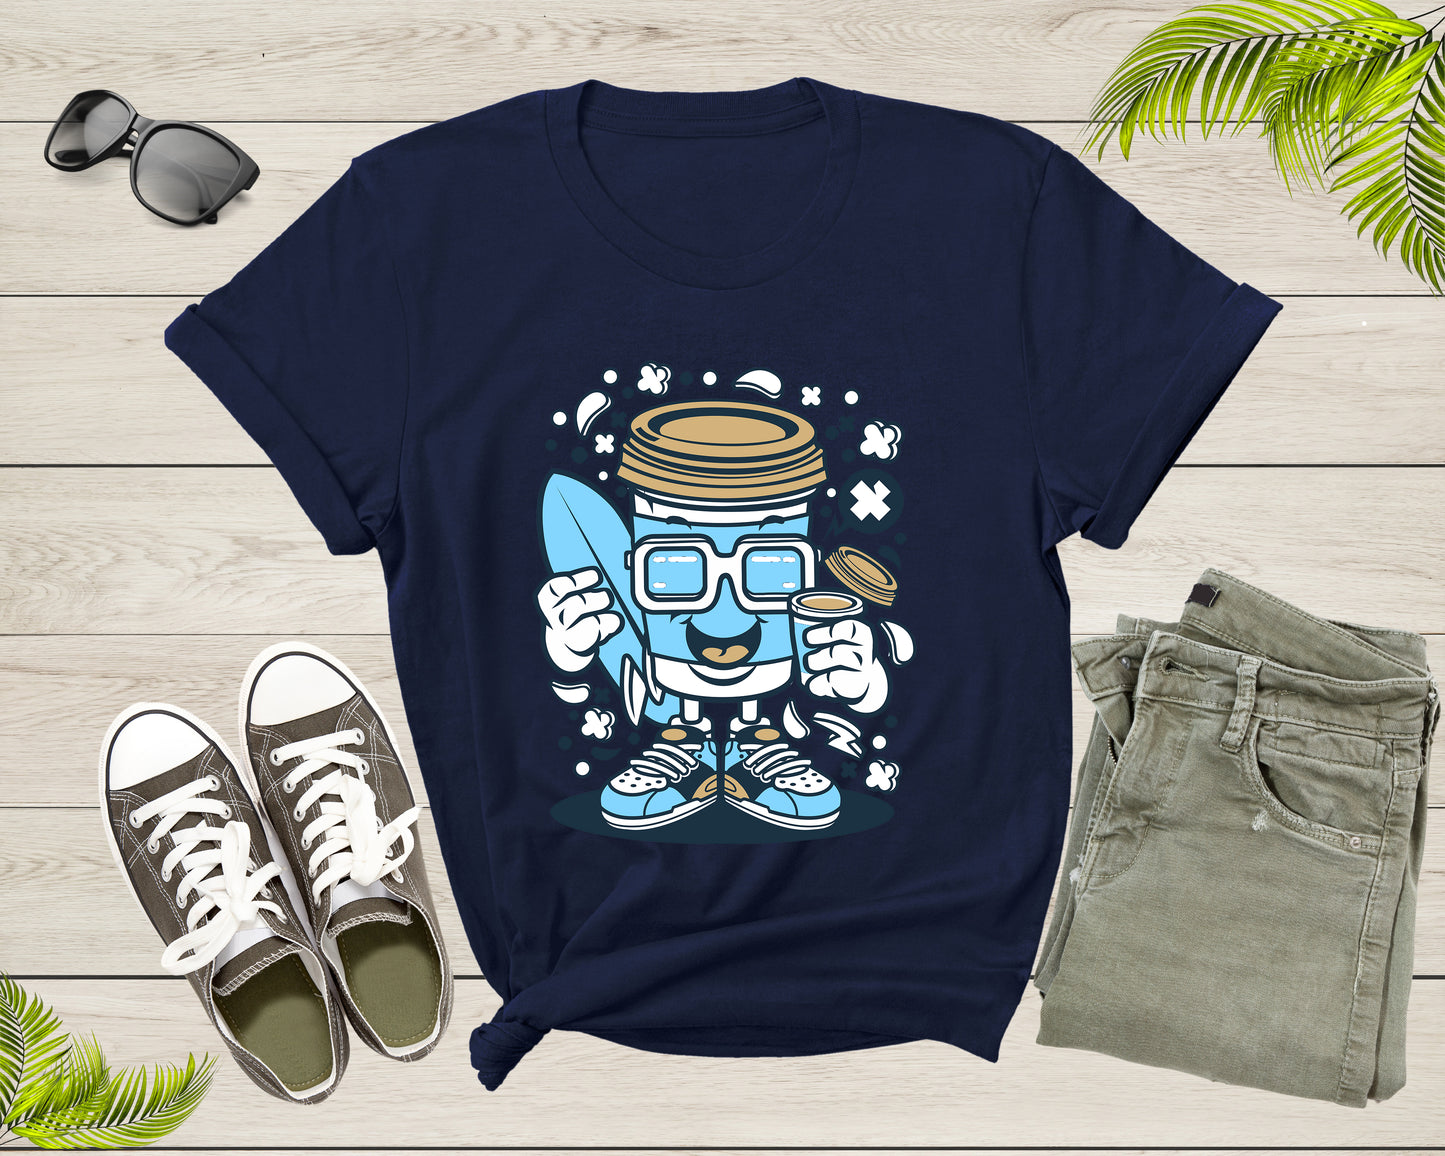 Happy Blue Coffee Cup Surfer with Sunglasses Holding Coffee T-Shirt Surf Coffee Lover Gift T Shirt for Men Women Kids Boys Girls Tshirt